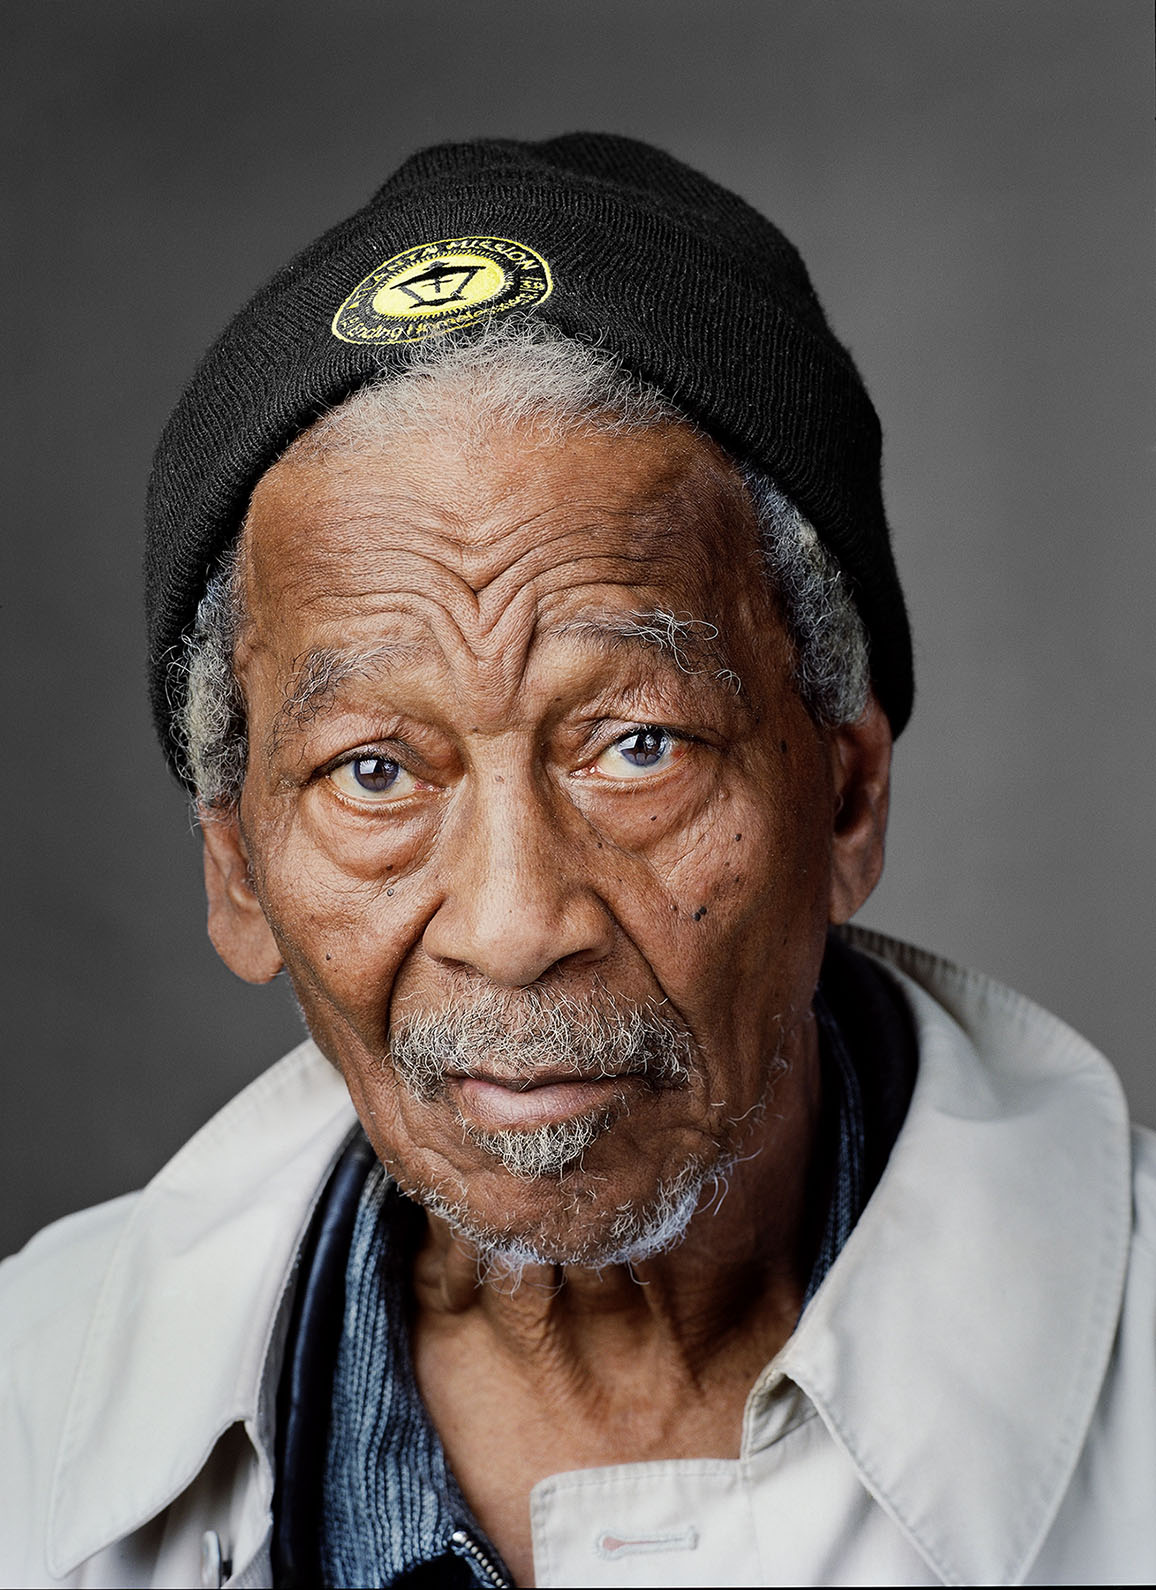 USA. "Down and Out in the South": Studio portraits of homeless people in Atlanta (GA), Columbia (SC) and the Mississippi Delta.  Ernest (b. Facefield, GA, 1931), photographed in Atlanta, GA, April 2011.   